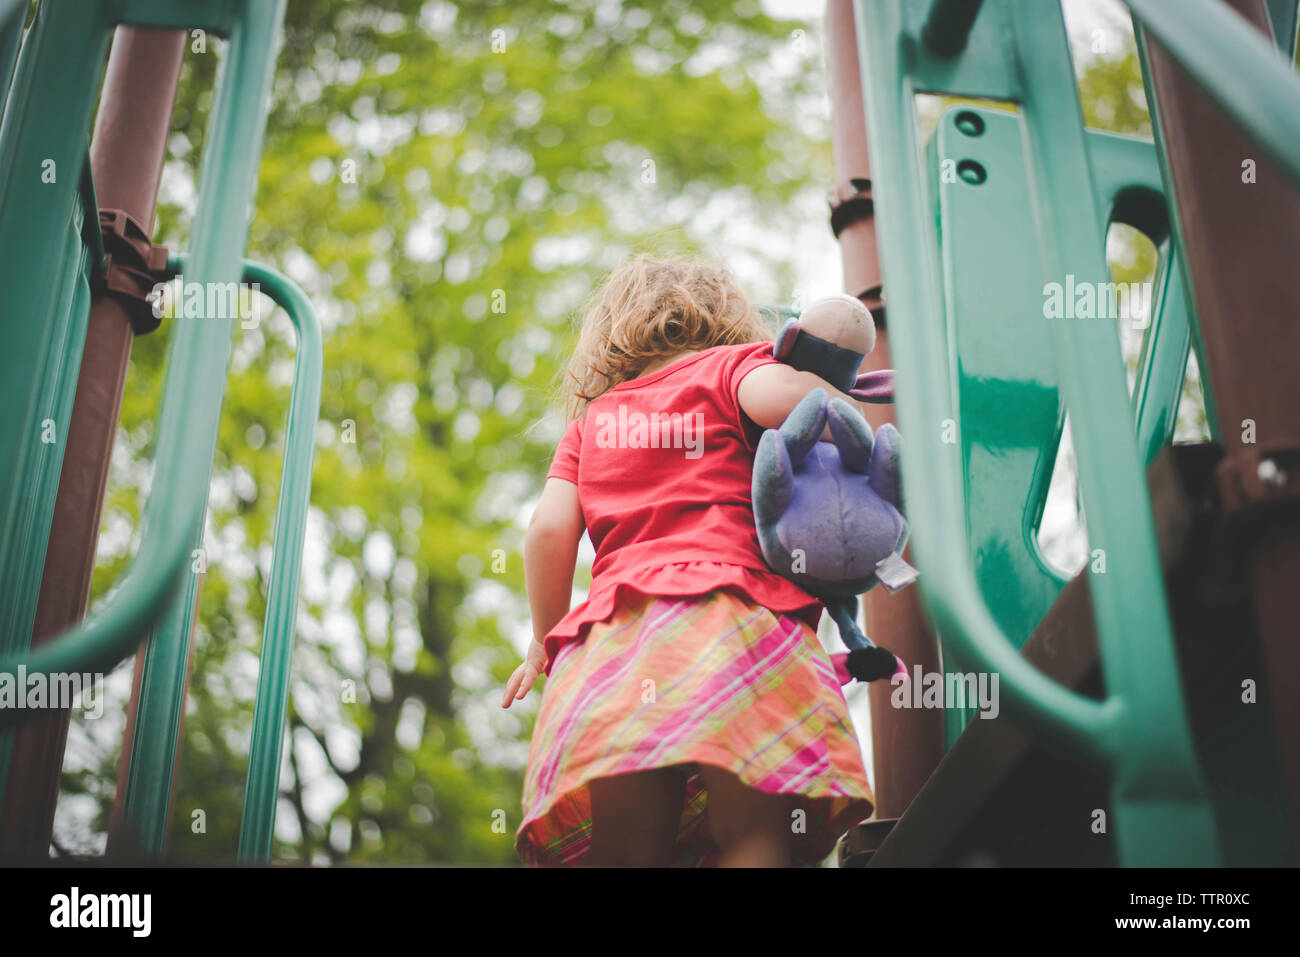 Low angle view of girl with stuffed toy standing on outdoor play equipment Stock Photo